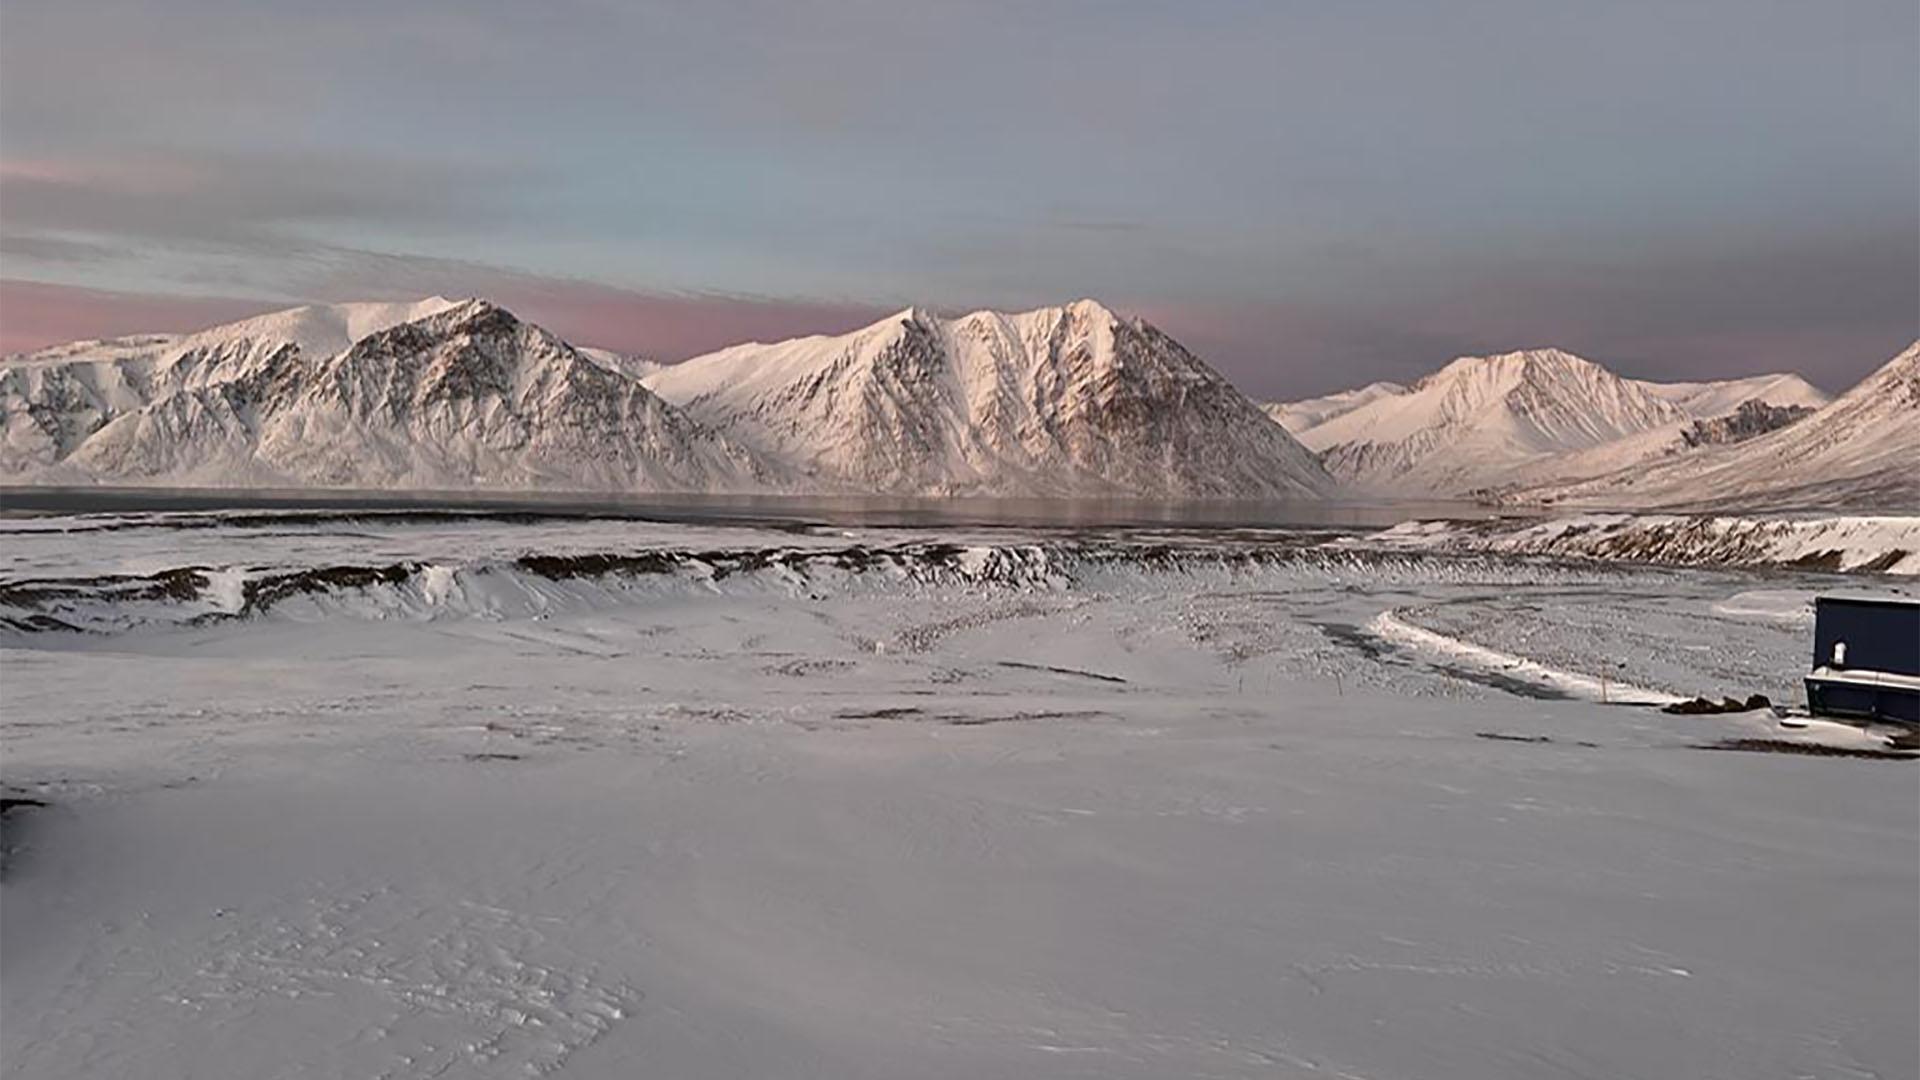 Image of a snow-covered mountain landscape in Greenland.